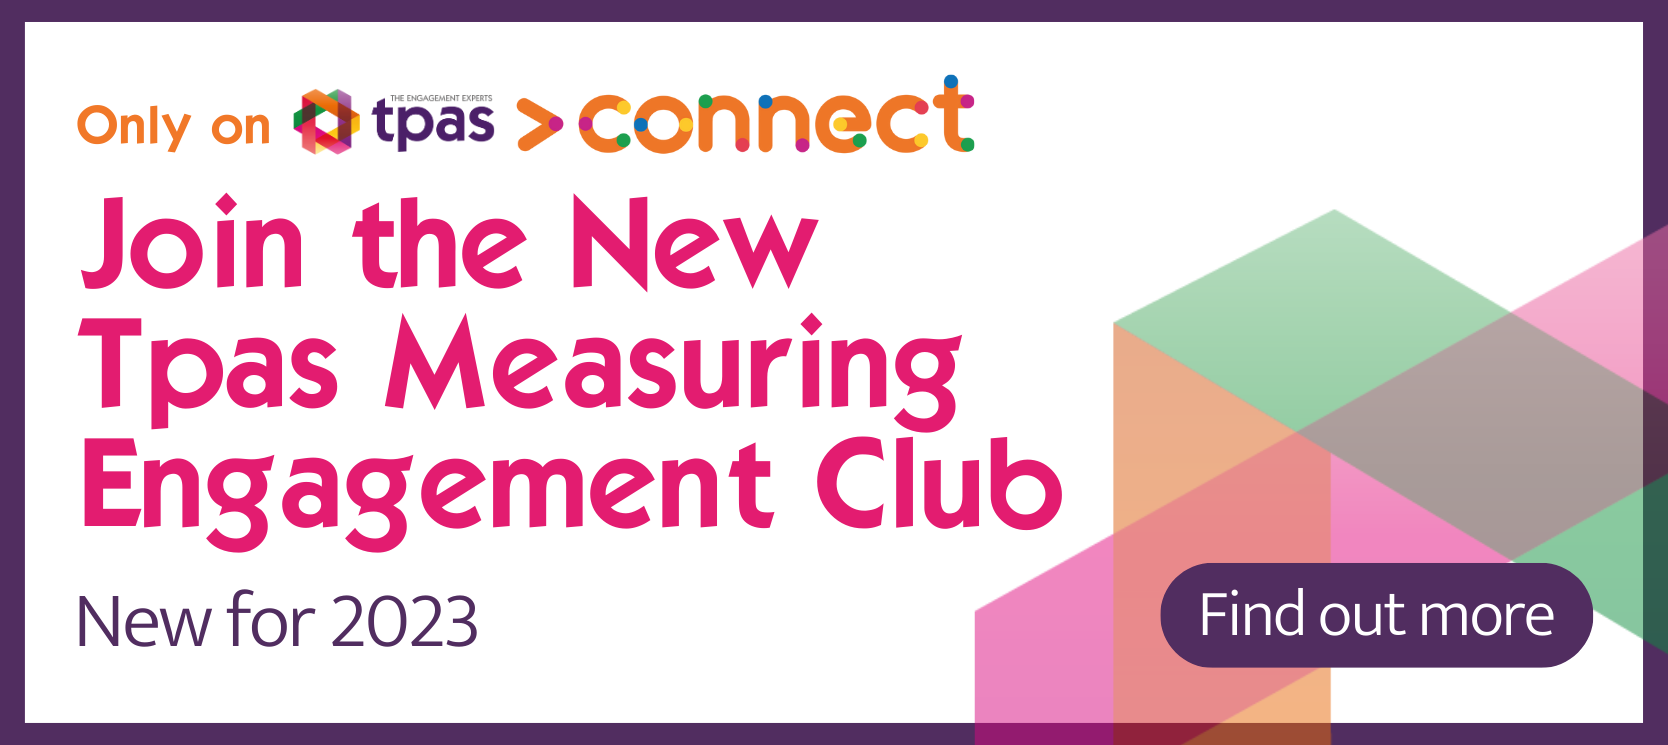 Measuring engagement club.png